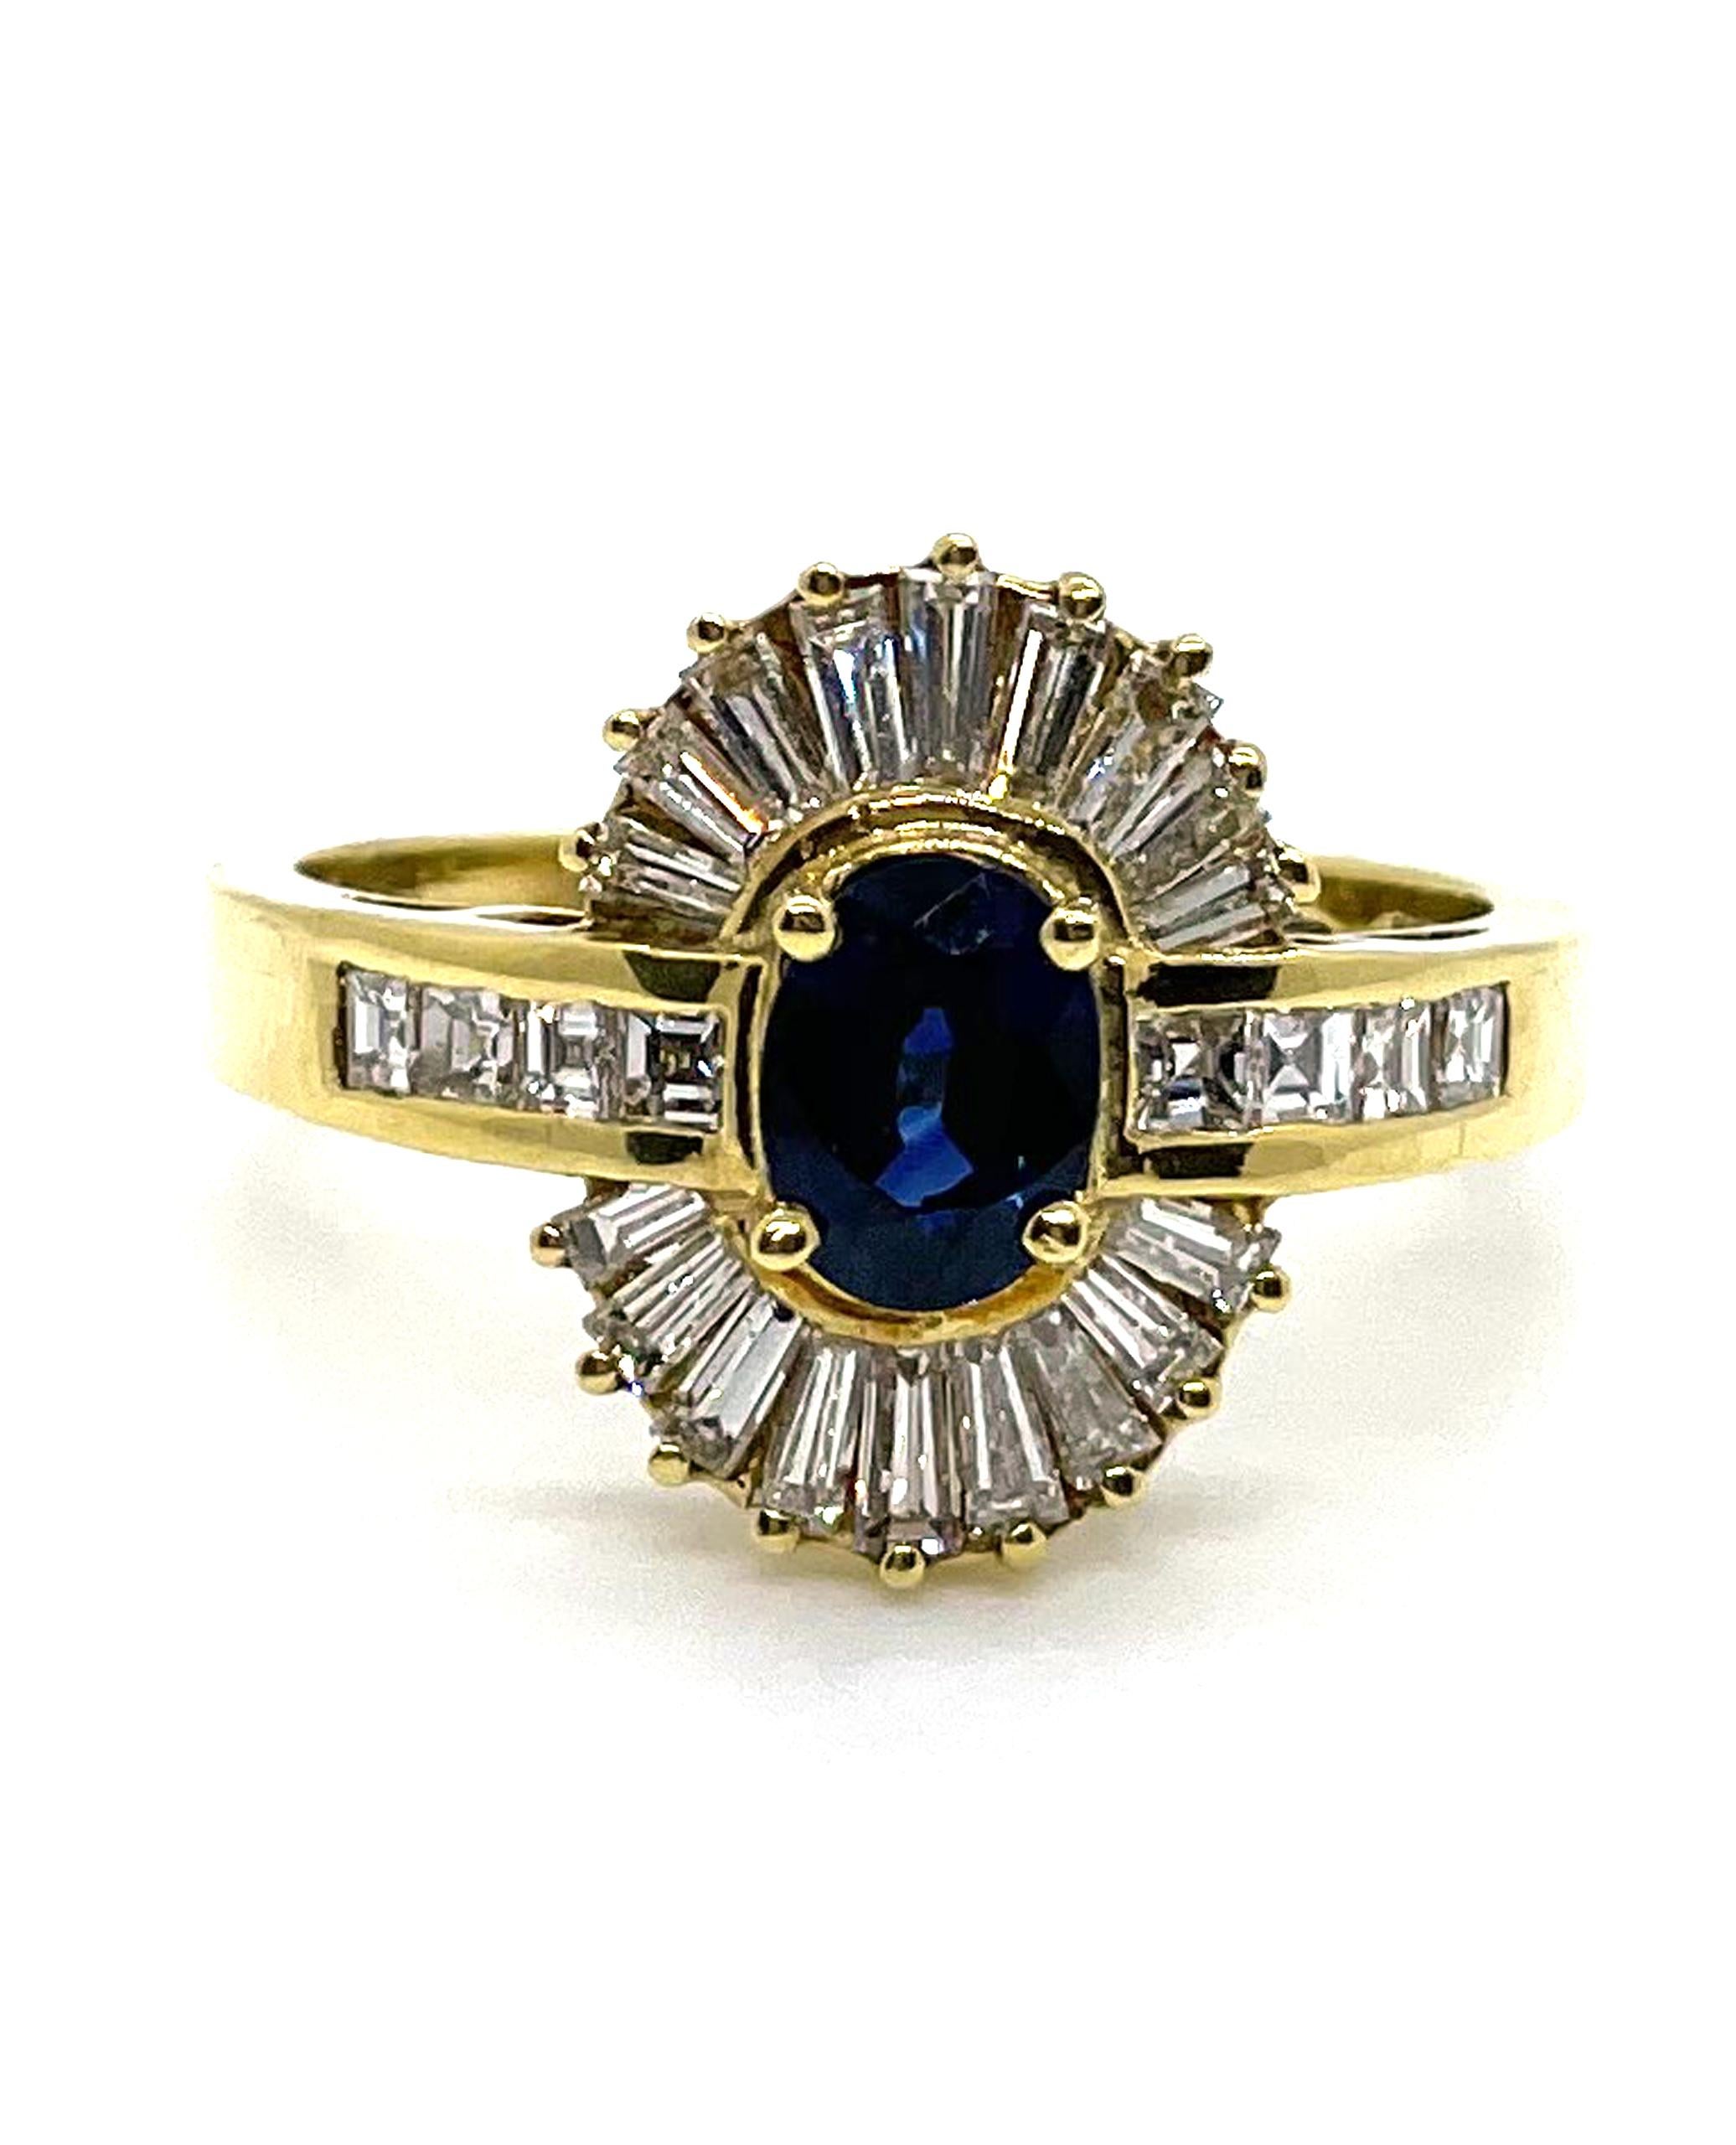 Baguette Cut Vintage Sapphire Ring with Baguette Diamonds Set in 18k Gold, Circa 1985 For Sale